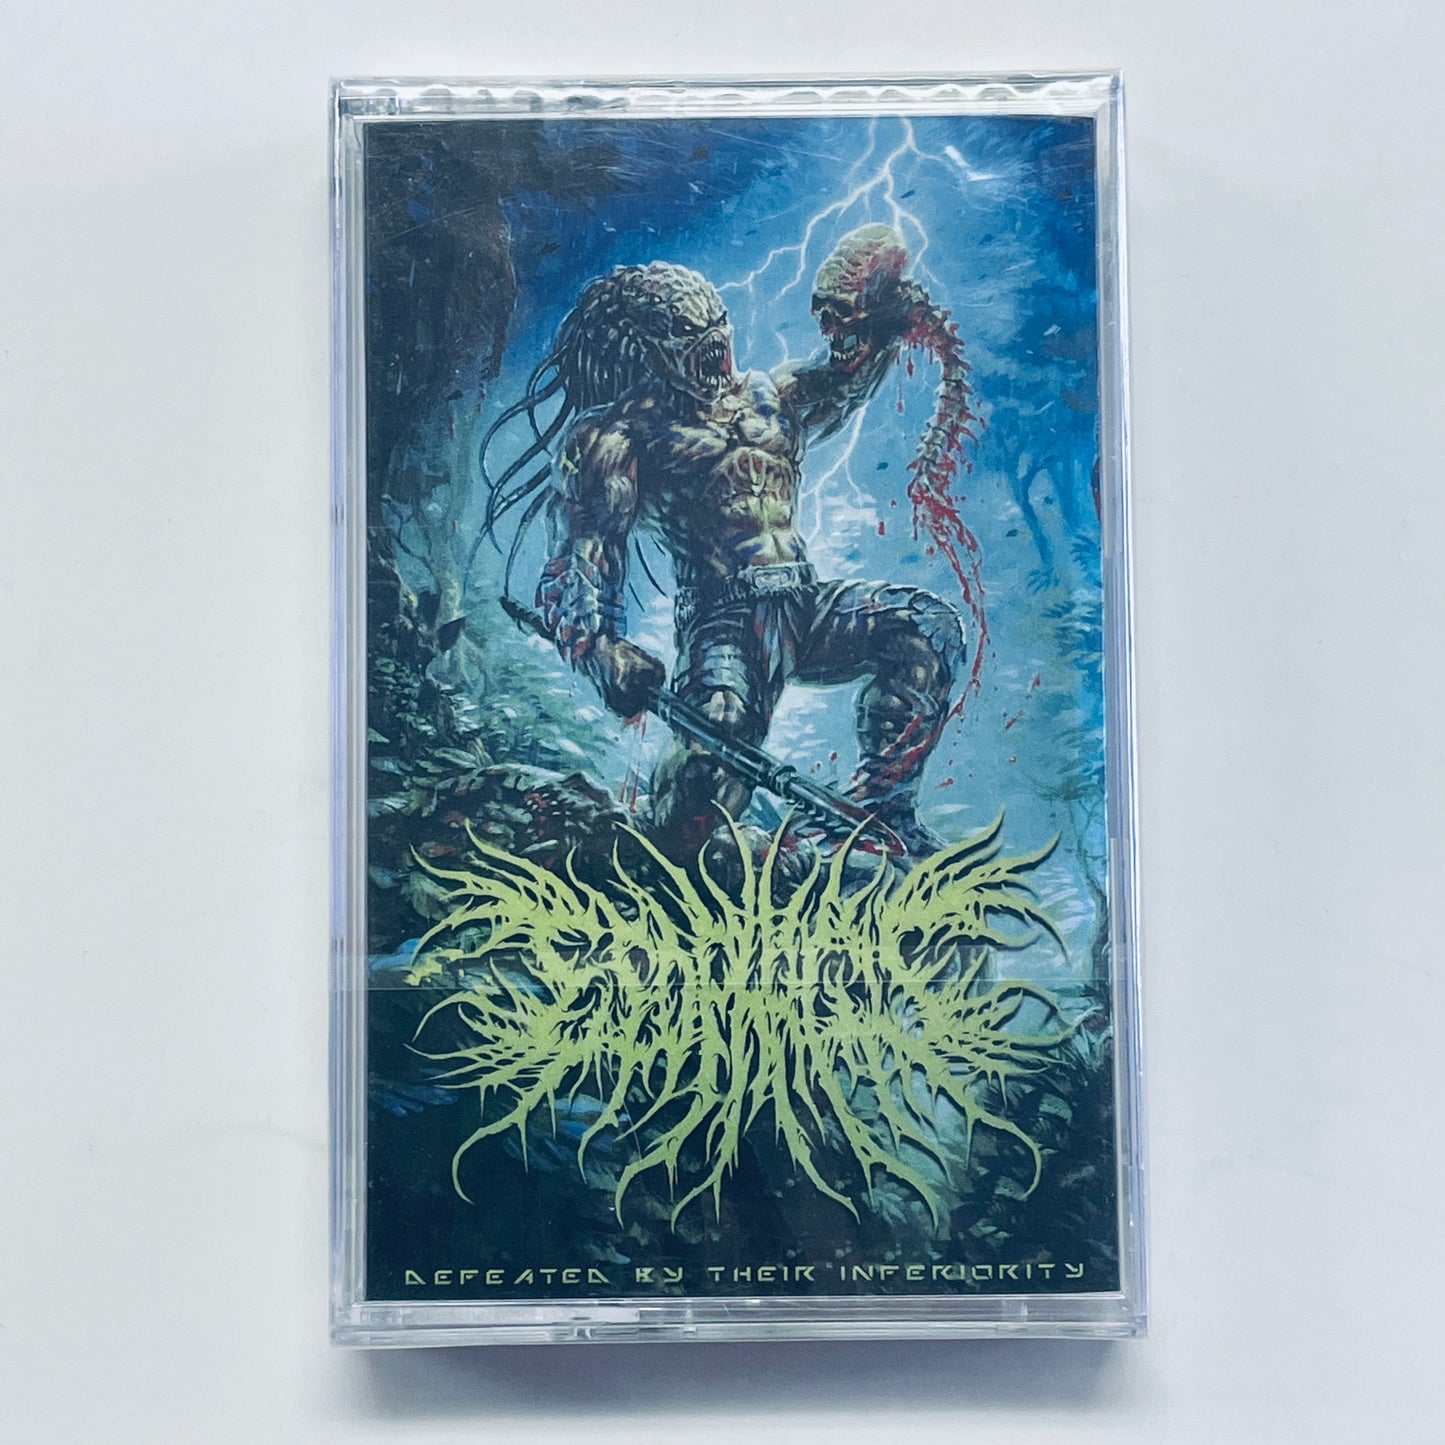 Esophagus - Defeated by Their Inferiority cassette tape